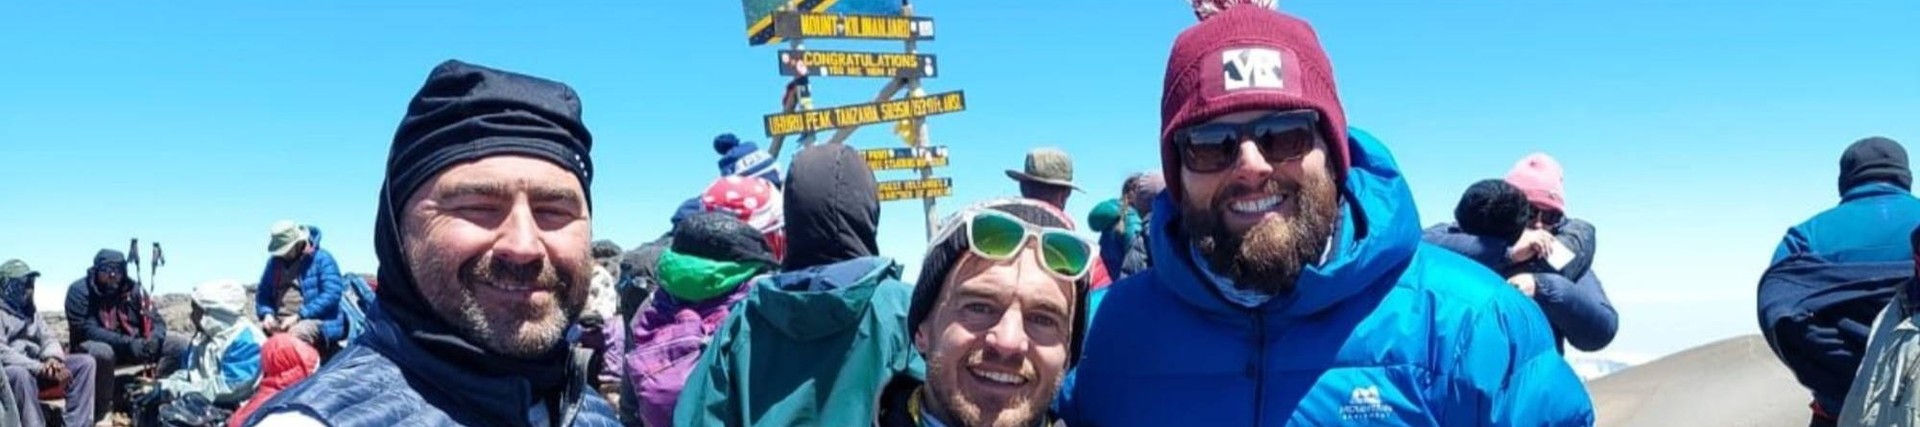 A record breaking climb up Kilimanjaro | Our Kili-climbers tell their story